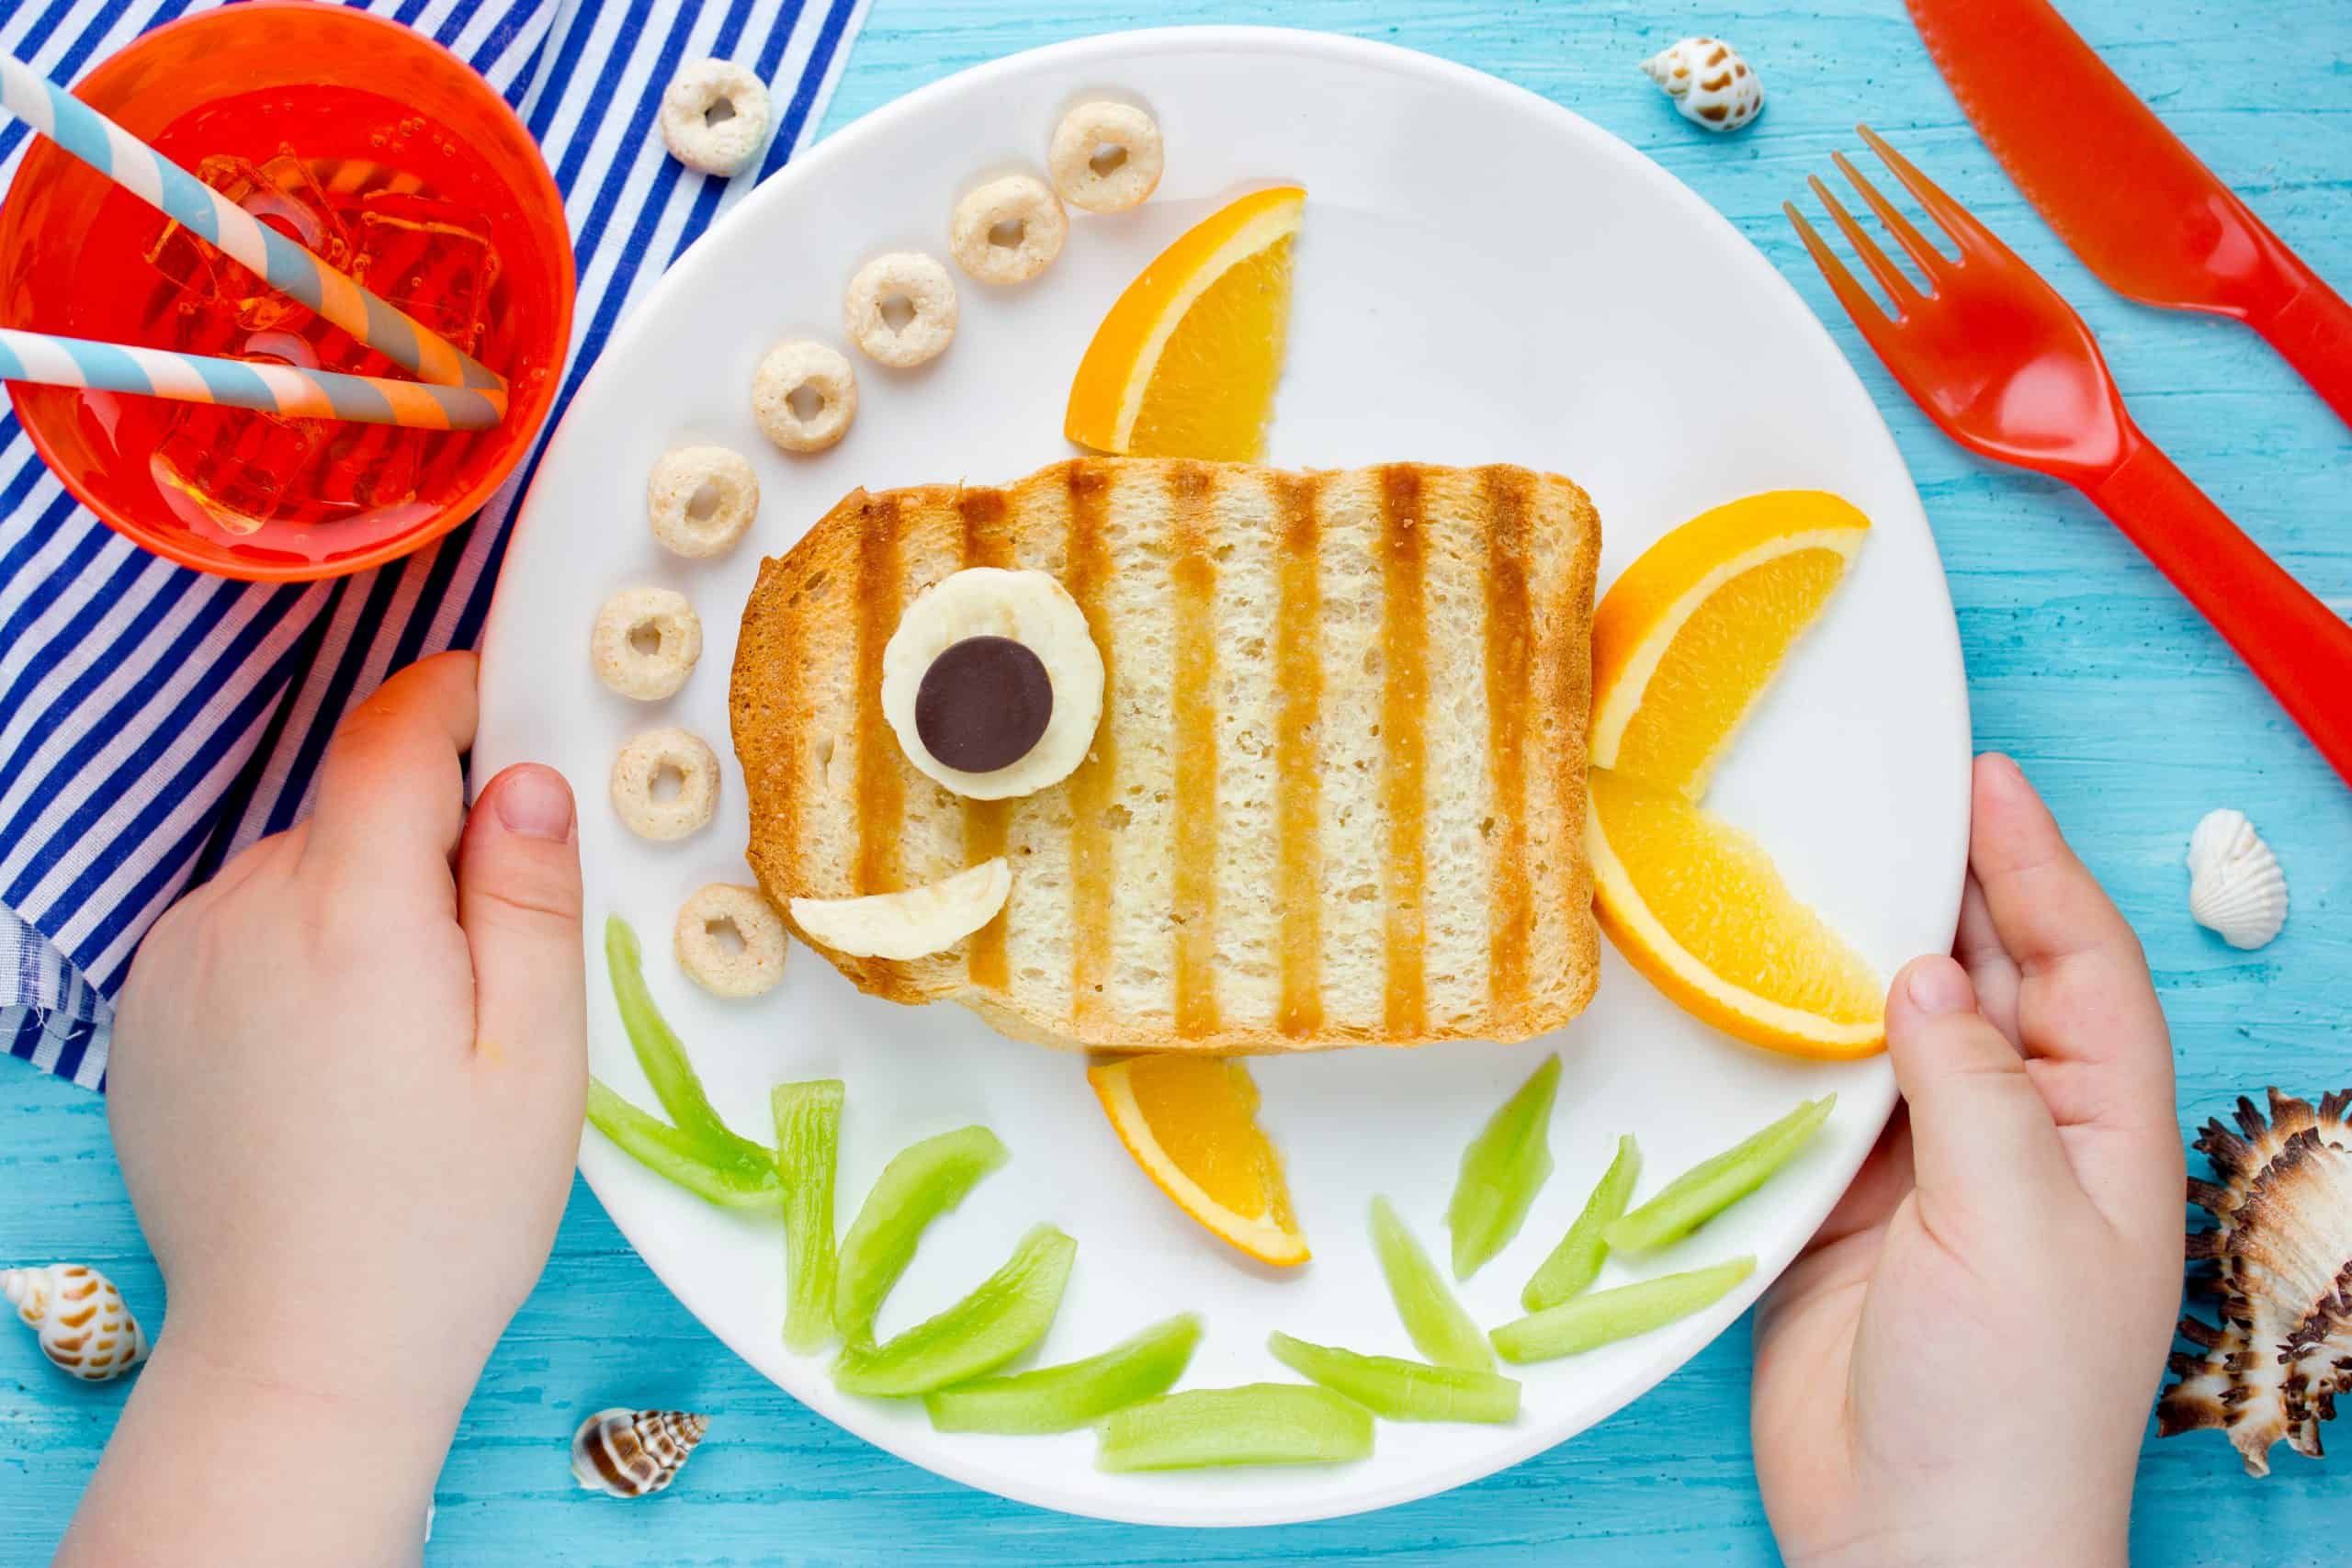 Funny Fish Sandwich Craft That the Kids Will Love